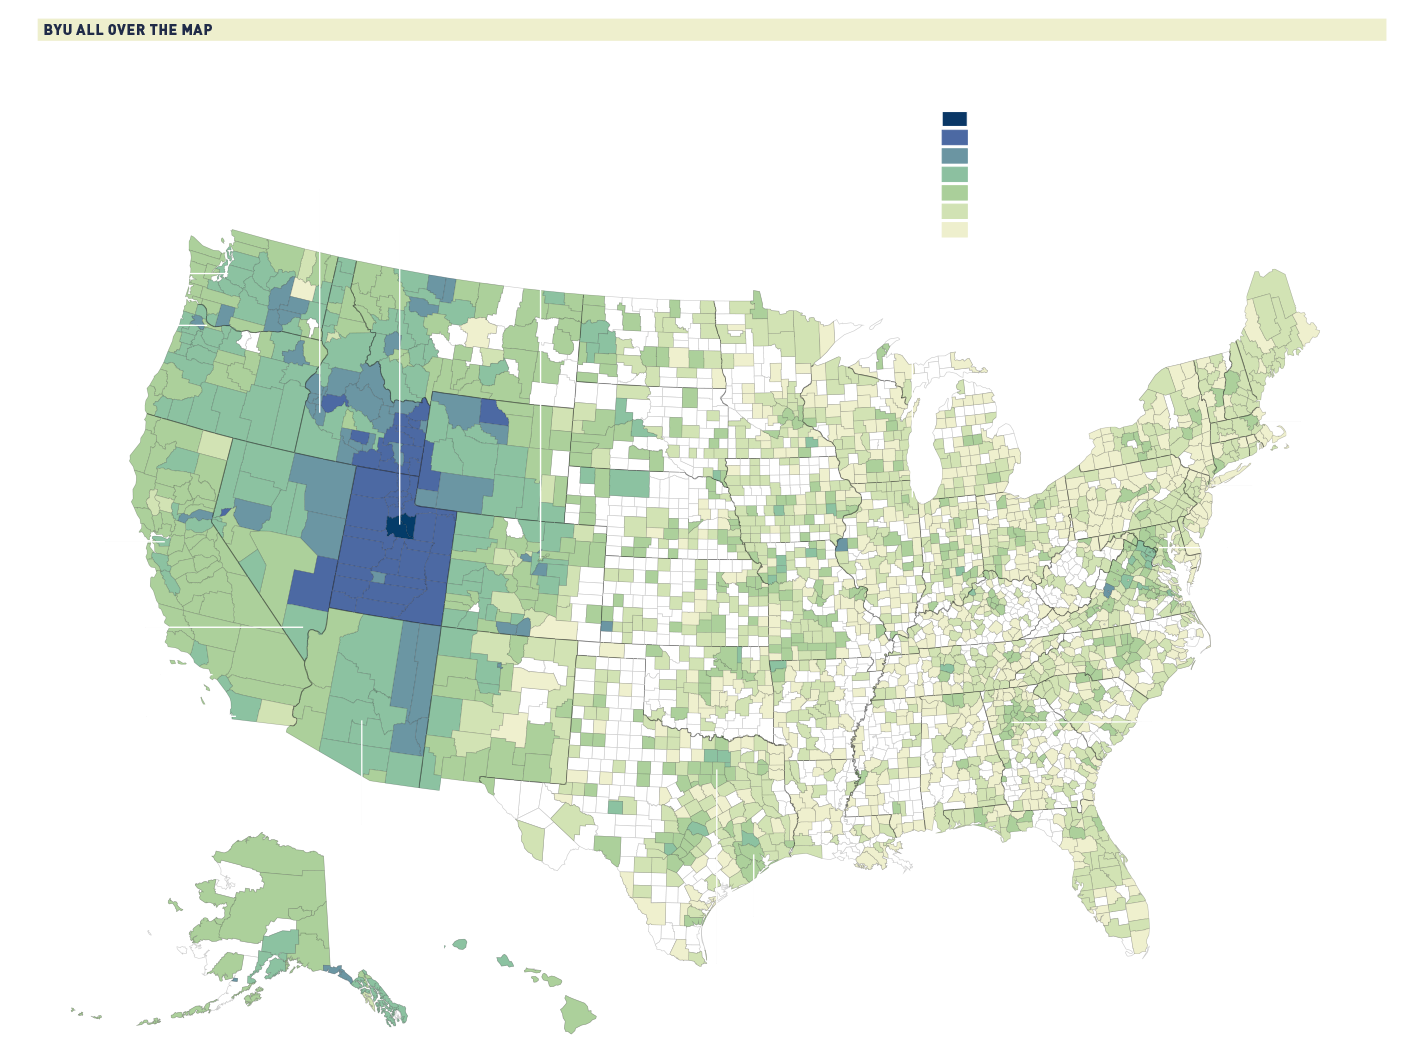 A map that shows the proportion of BYU grads within the population of each U.S. county.